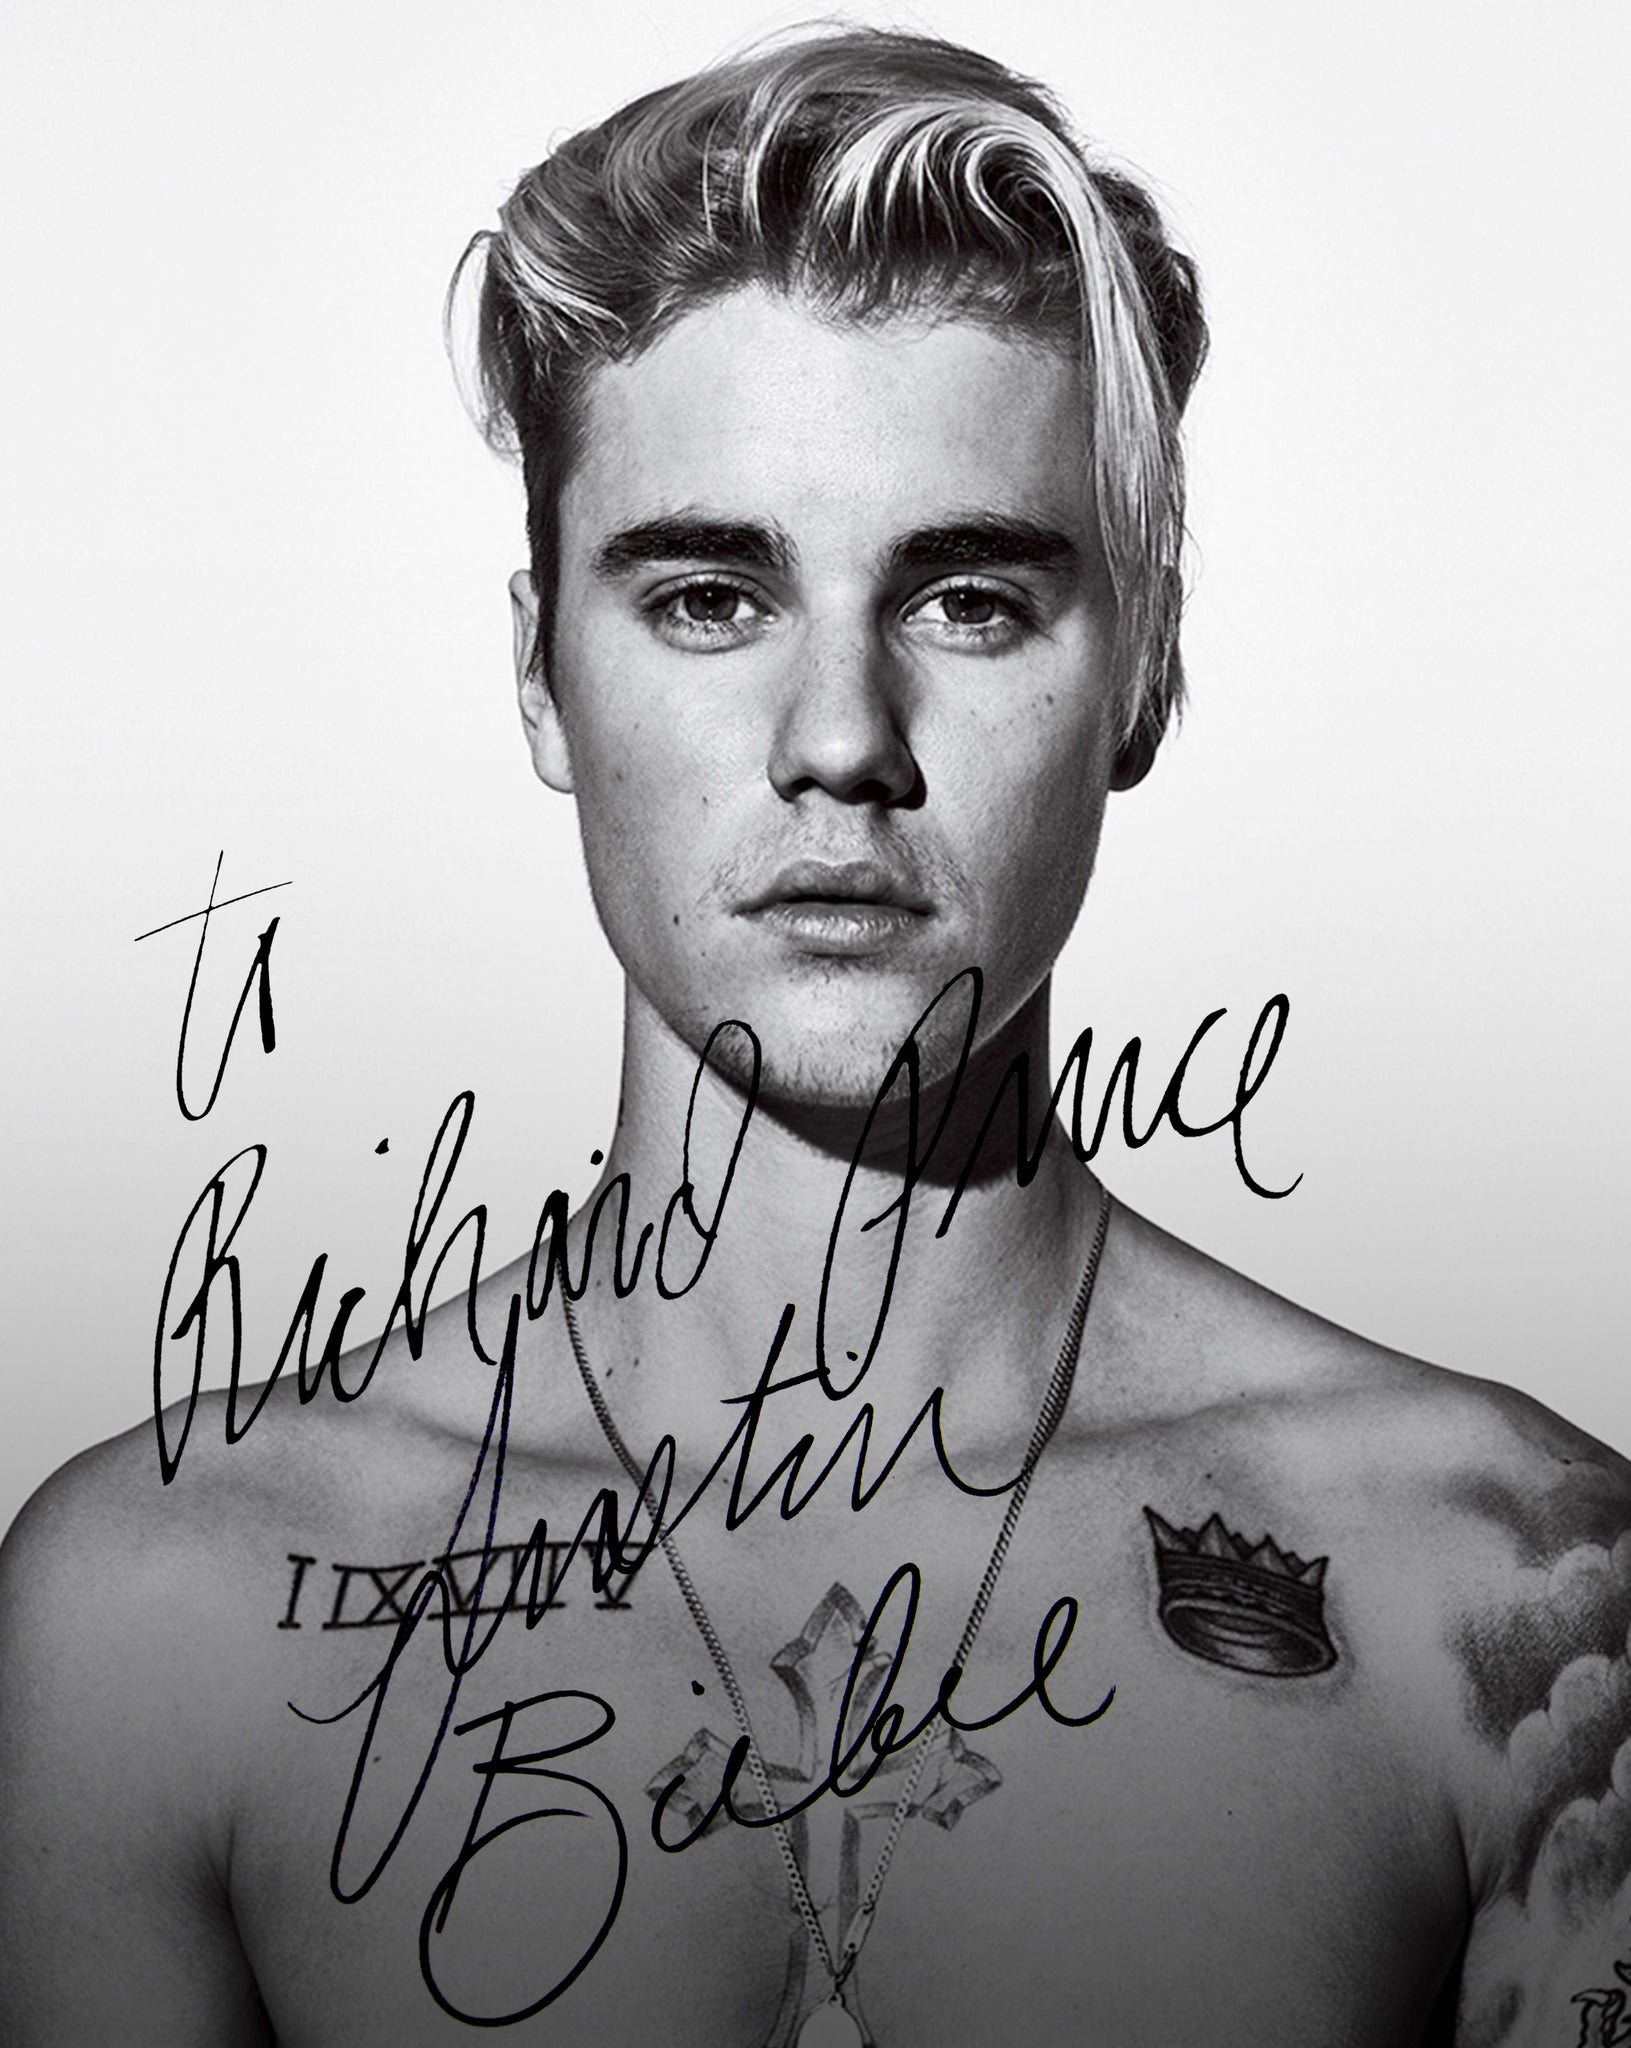 "Richard Prince" (Jonathan Paul), "All The More Best - Justin Bieber"